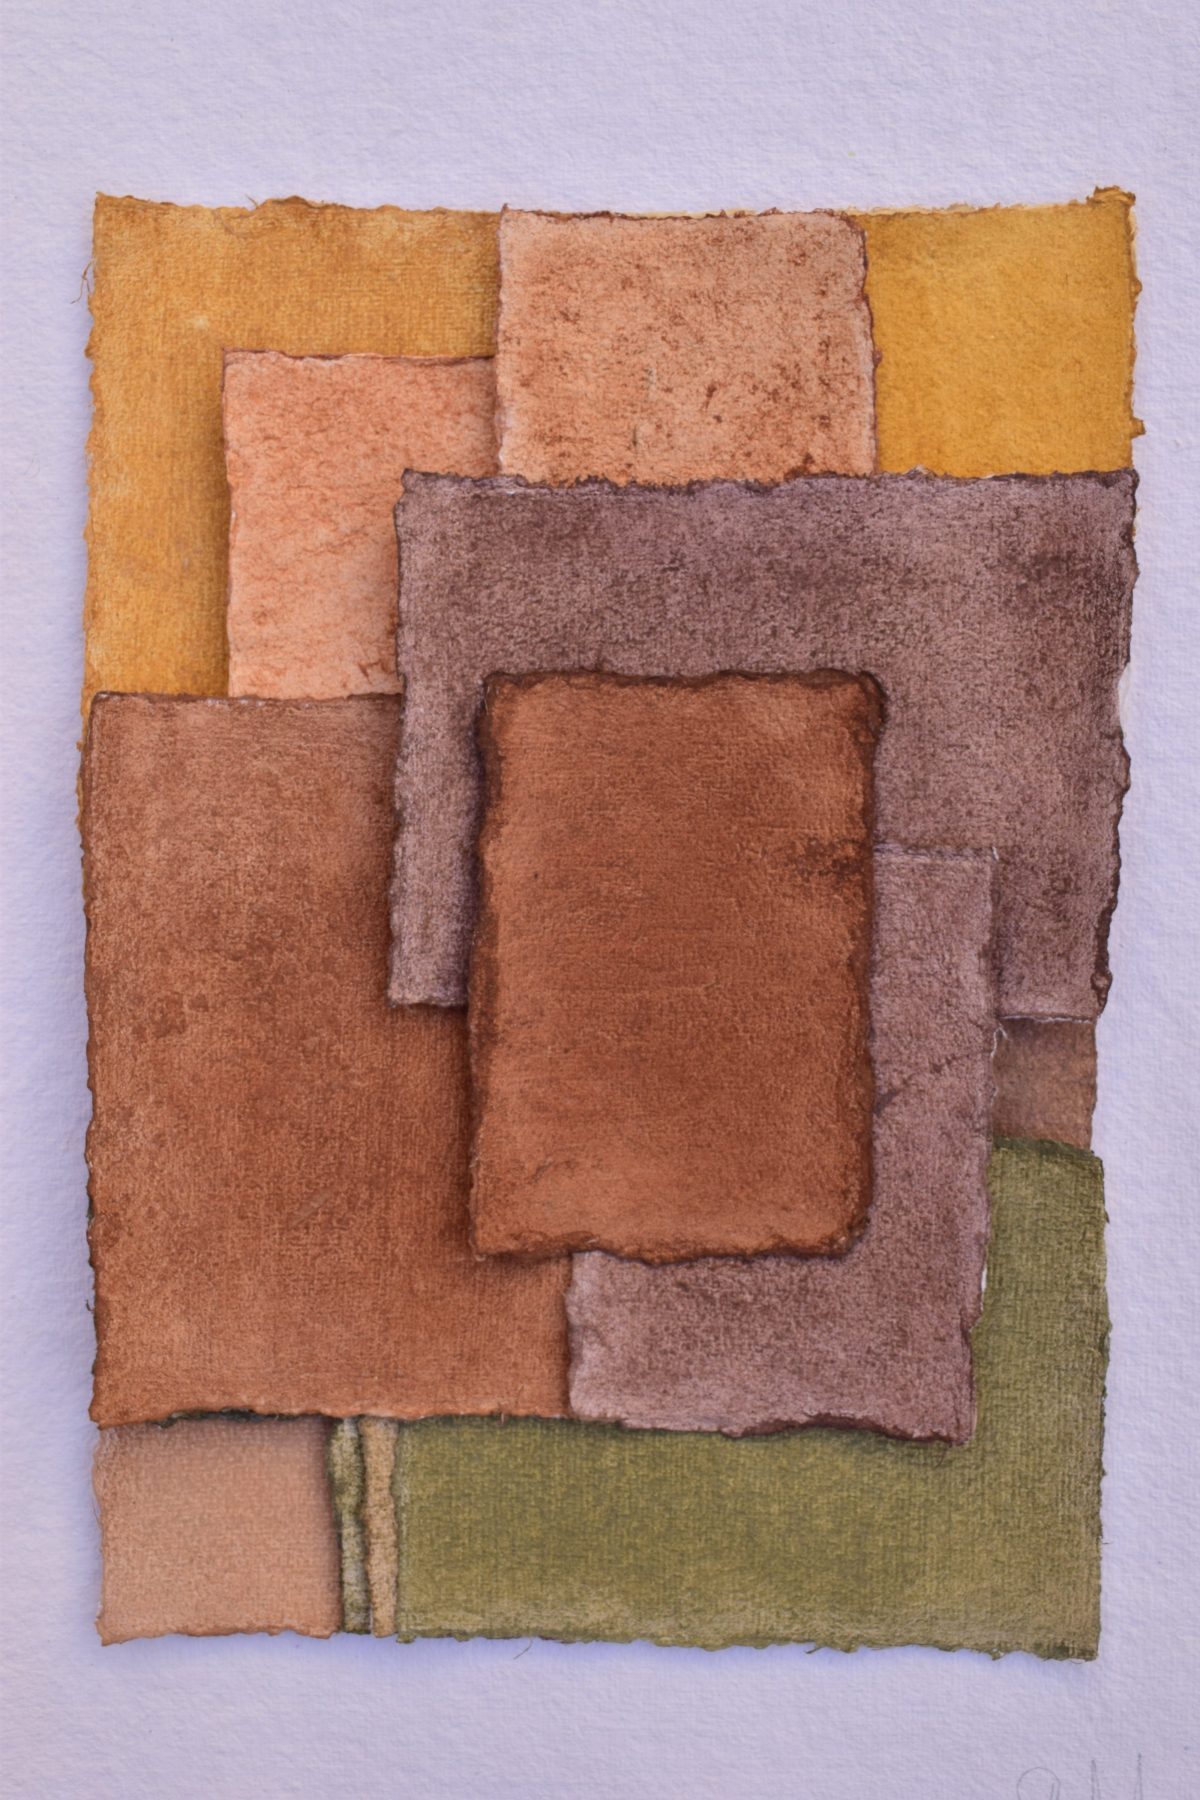 Handmade papers, pigment from grounded stones from Mojácar and yarn